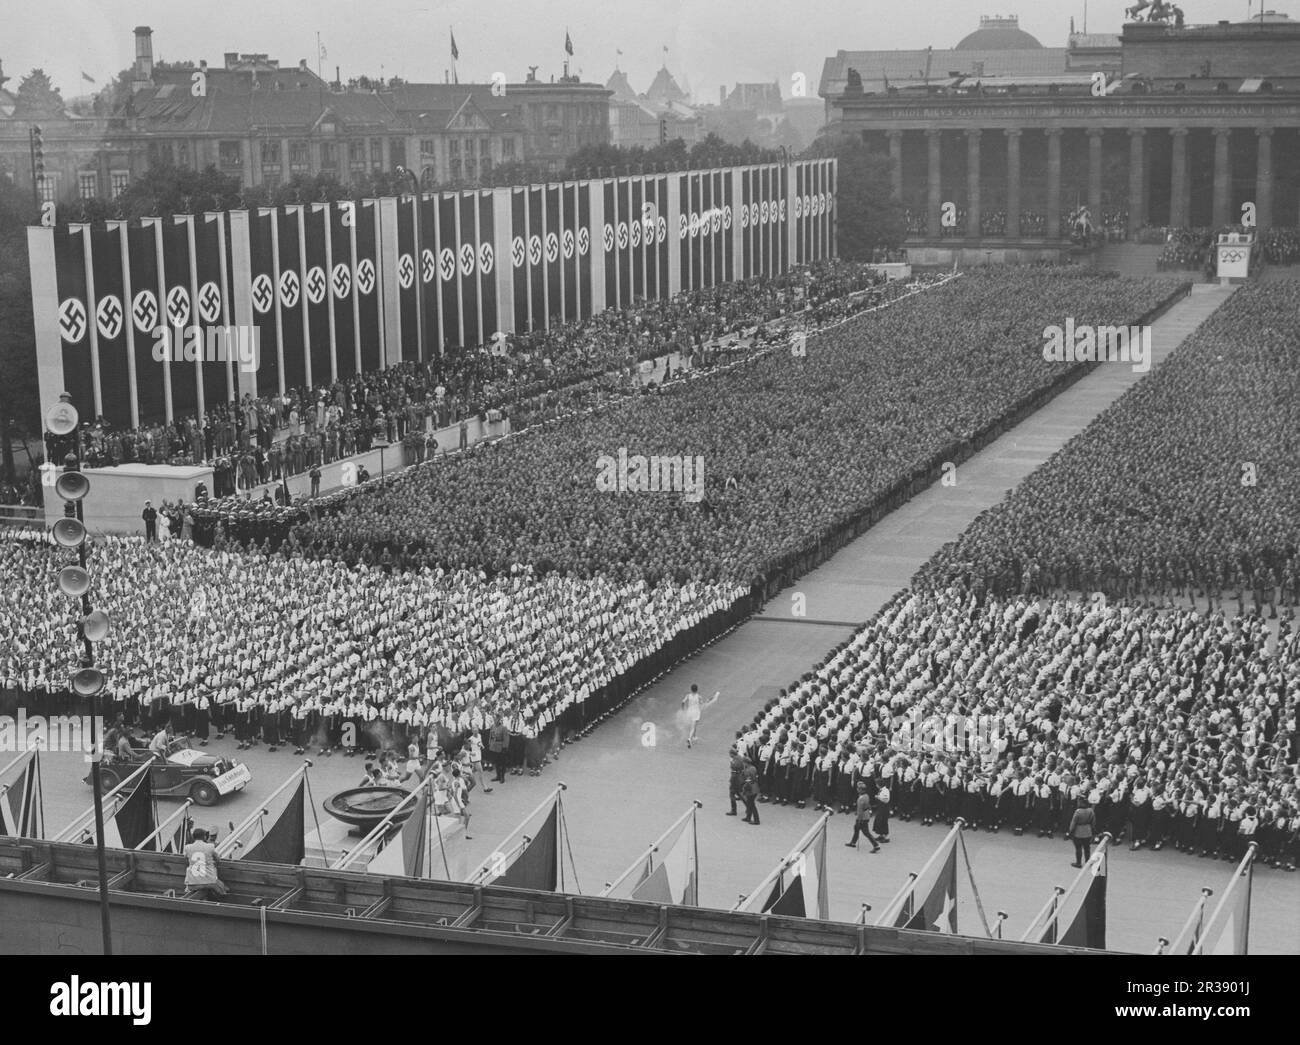 Berlin Olympics 1936. The 1936 Summer Olympics (German: Olympische Sommerspiele 1936), officially known as the Games of the XI Olympiad (German: Spiele der XI. Olympiade) and commonly known as Berlin 1936, were an international multi-sport event held from 1 to 16 August 1936 in Berlin, Germany.  Pictured the olympic flame being transported to the Olympiastadion in Berlin by runners, this ceremony is called Olympic torch relay. The nazi flags are seen hanging there. Stock Photo